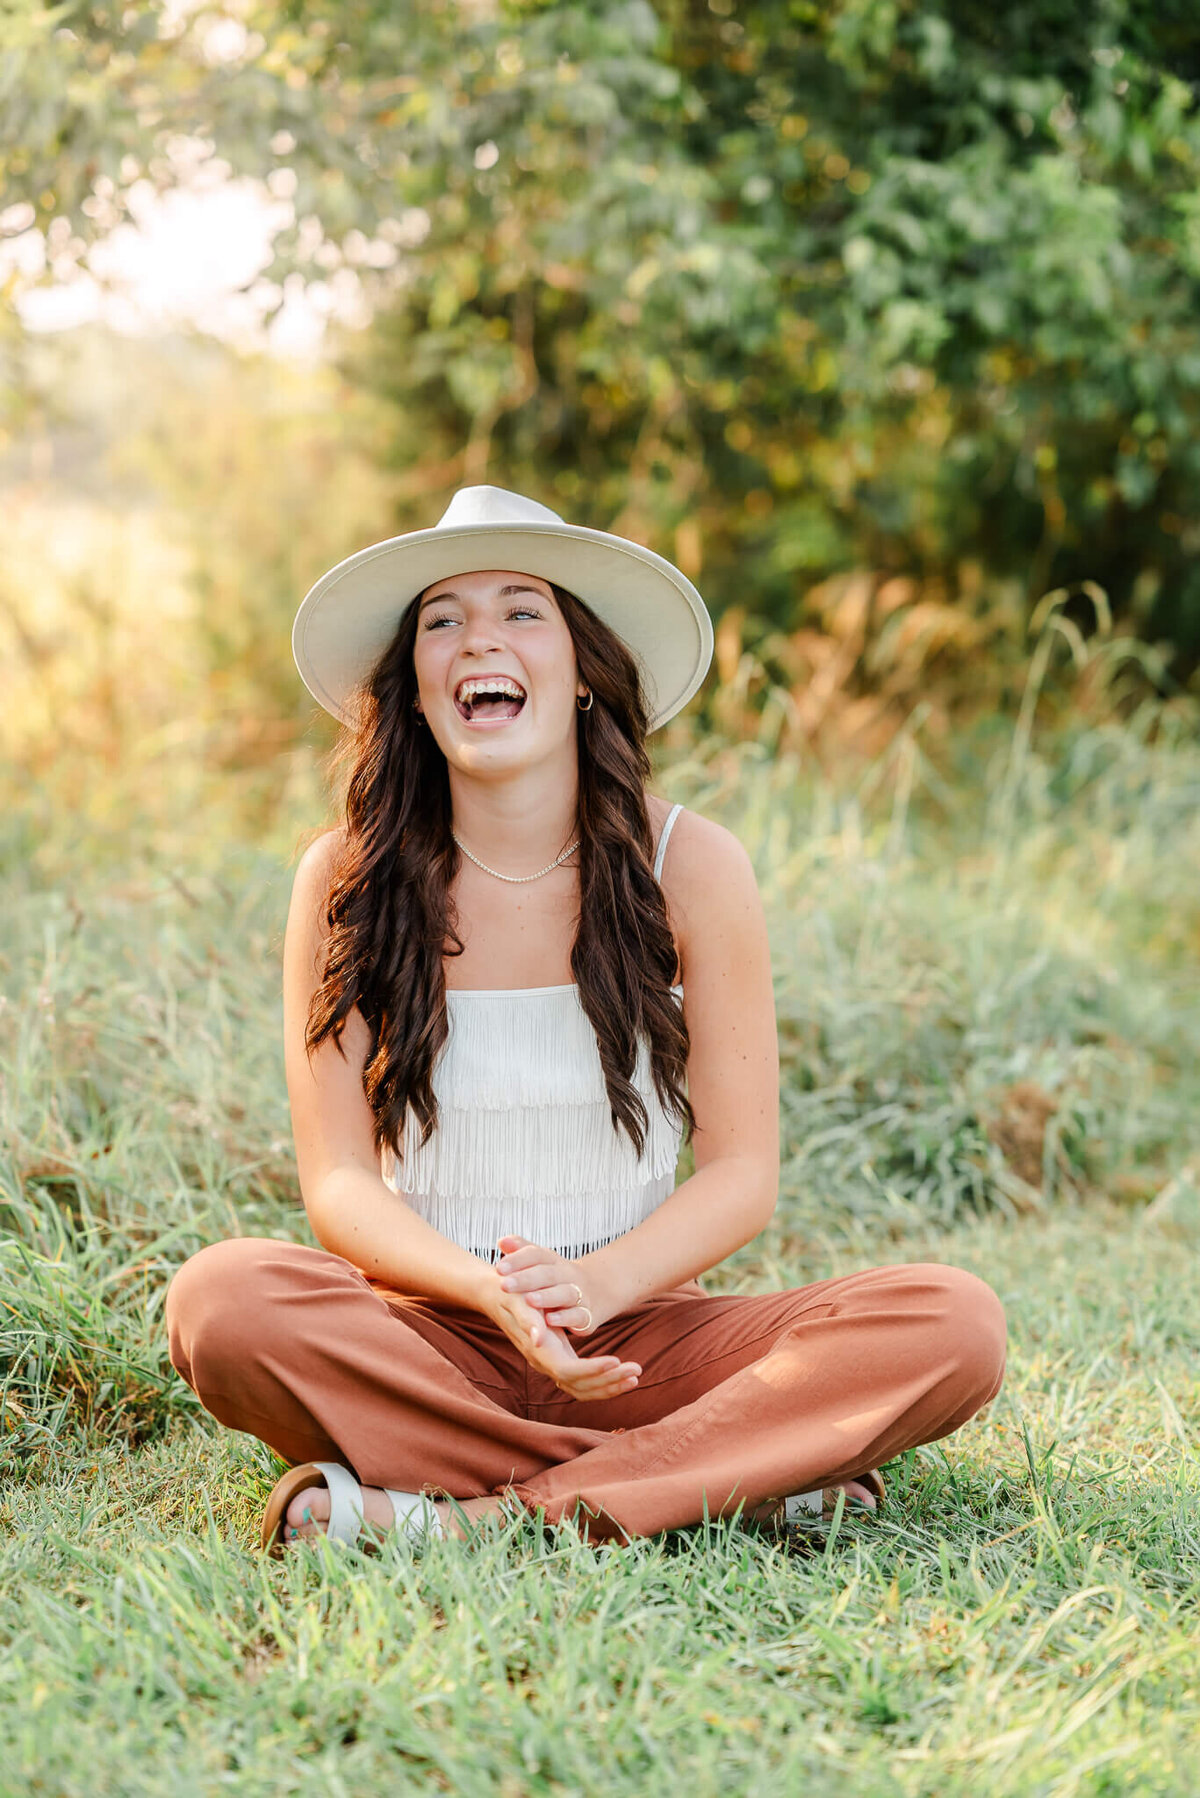 A high school senior wearing orange pants, a white fringe top, and a white hat sits in the grass and laughs. Photo taken at Bells Mill Park in Chesapeake by Justine Renee Photography.